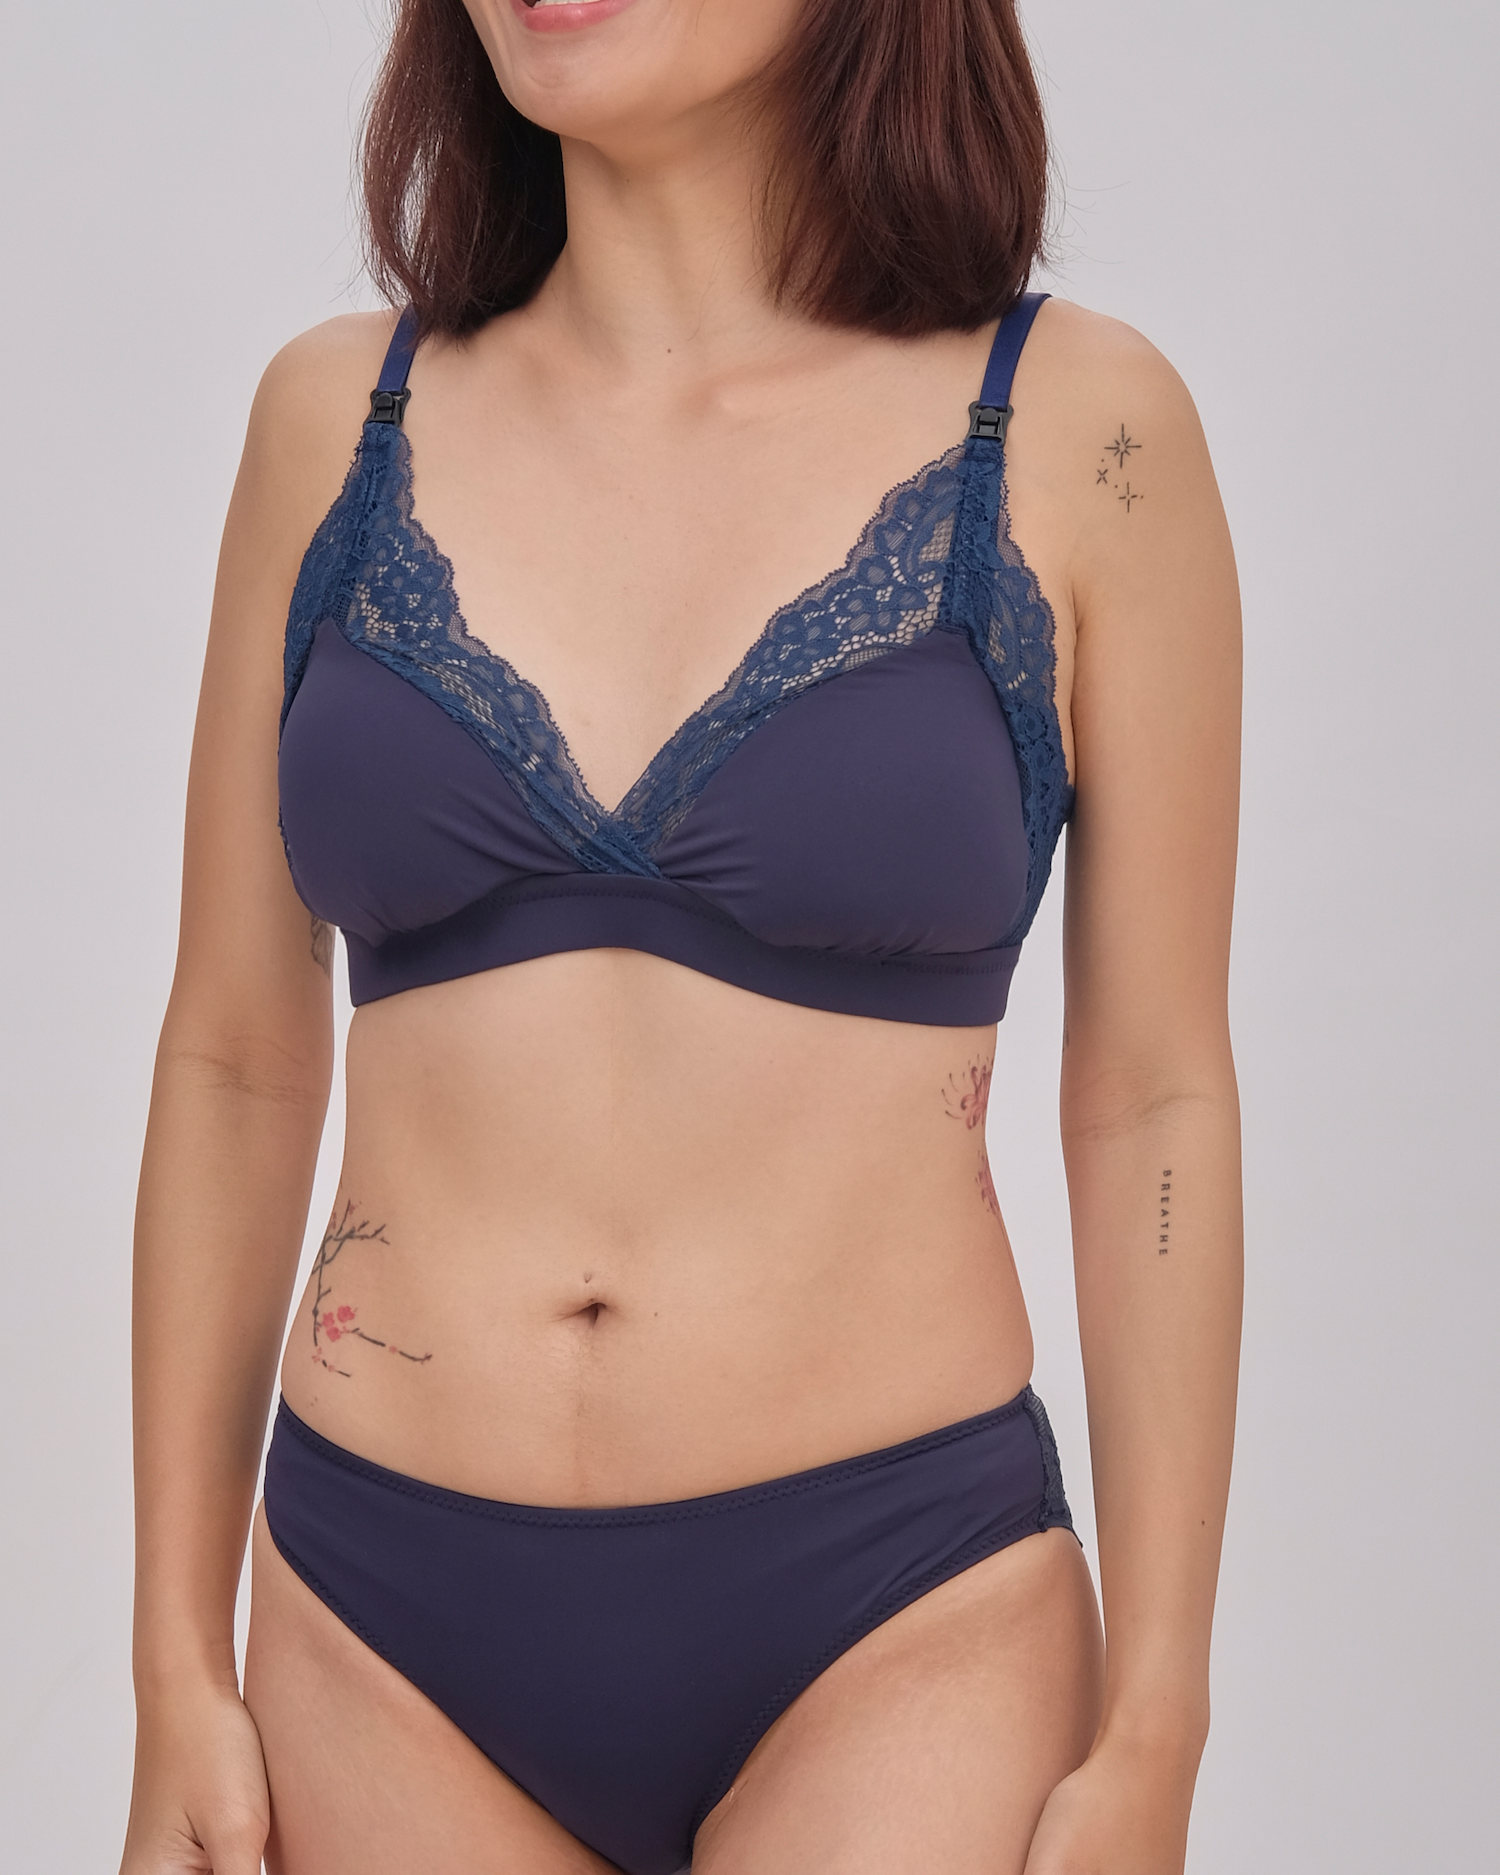 amor padded bralette in nautical – Our Bralette Club